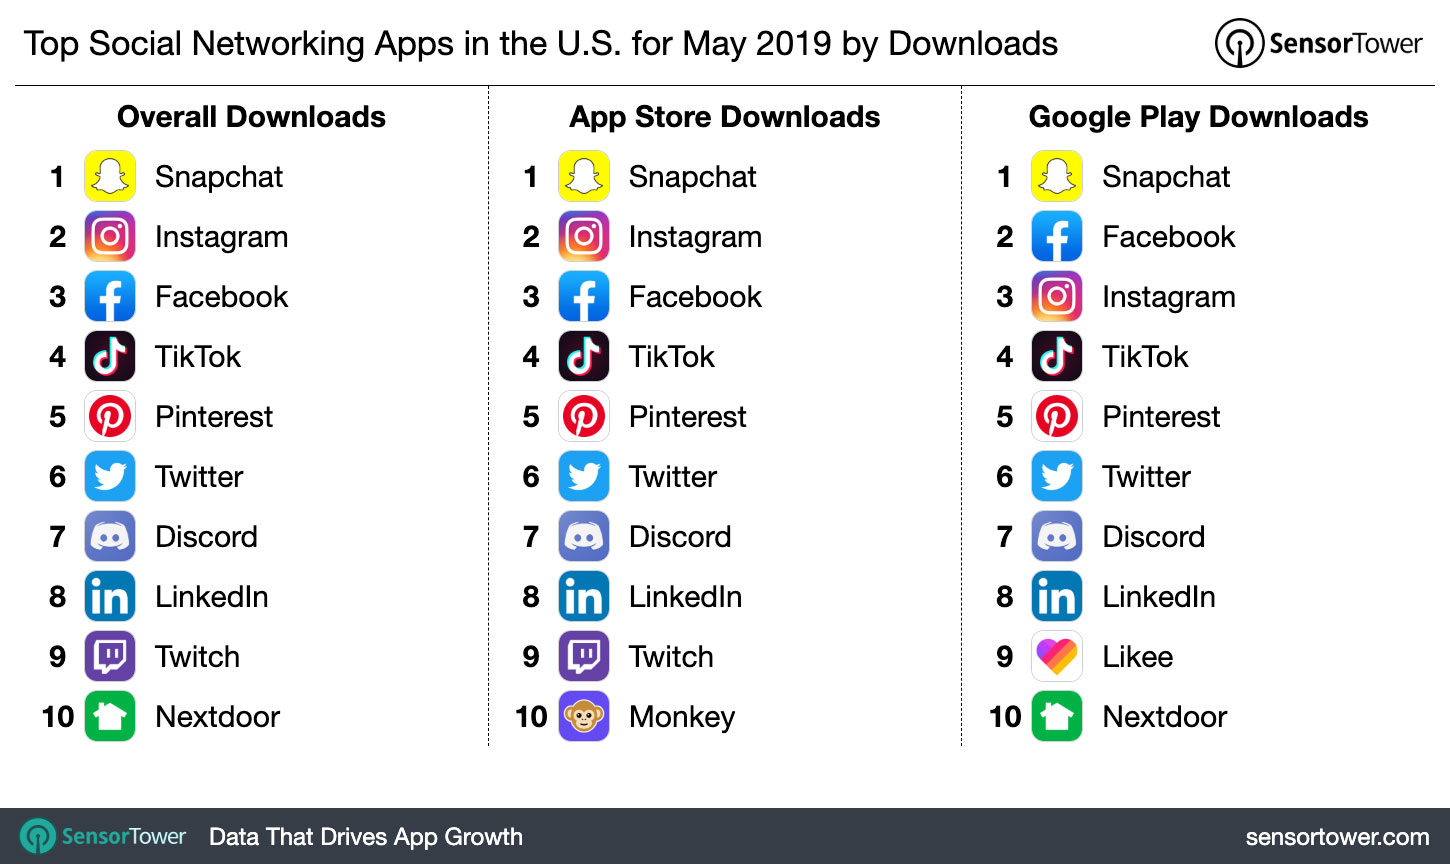 Top Social Networking Apps in the U.S. for May 2019 by Downloads